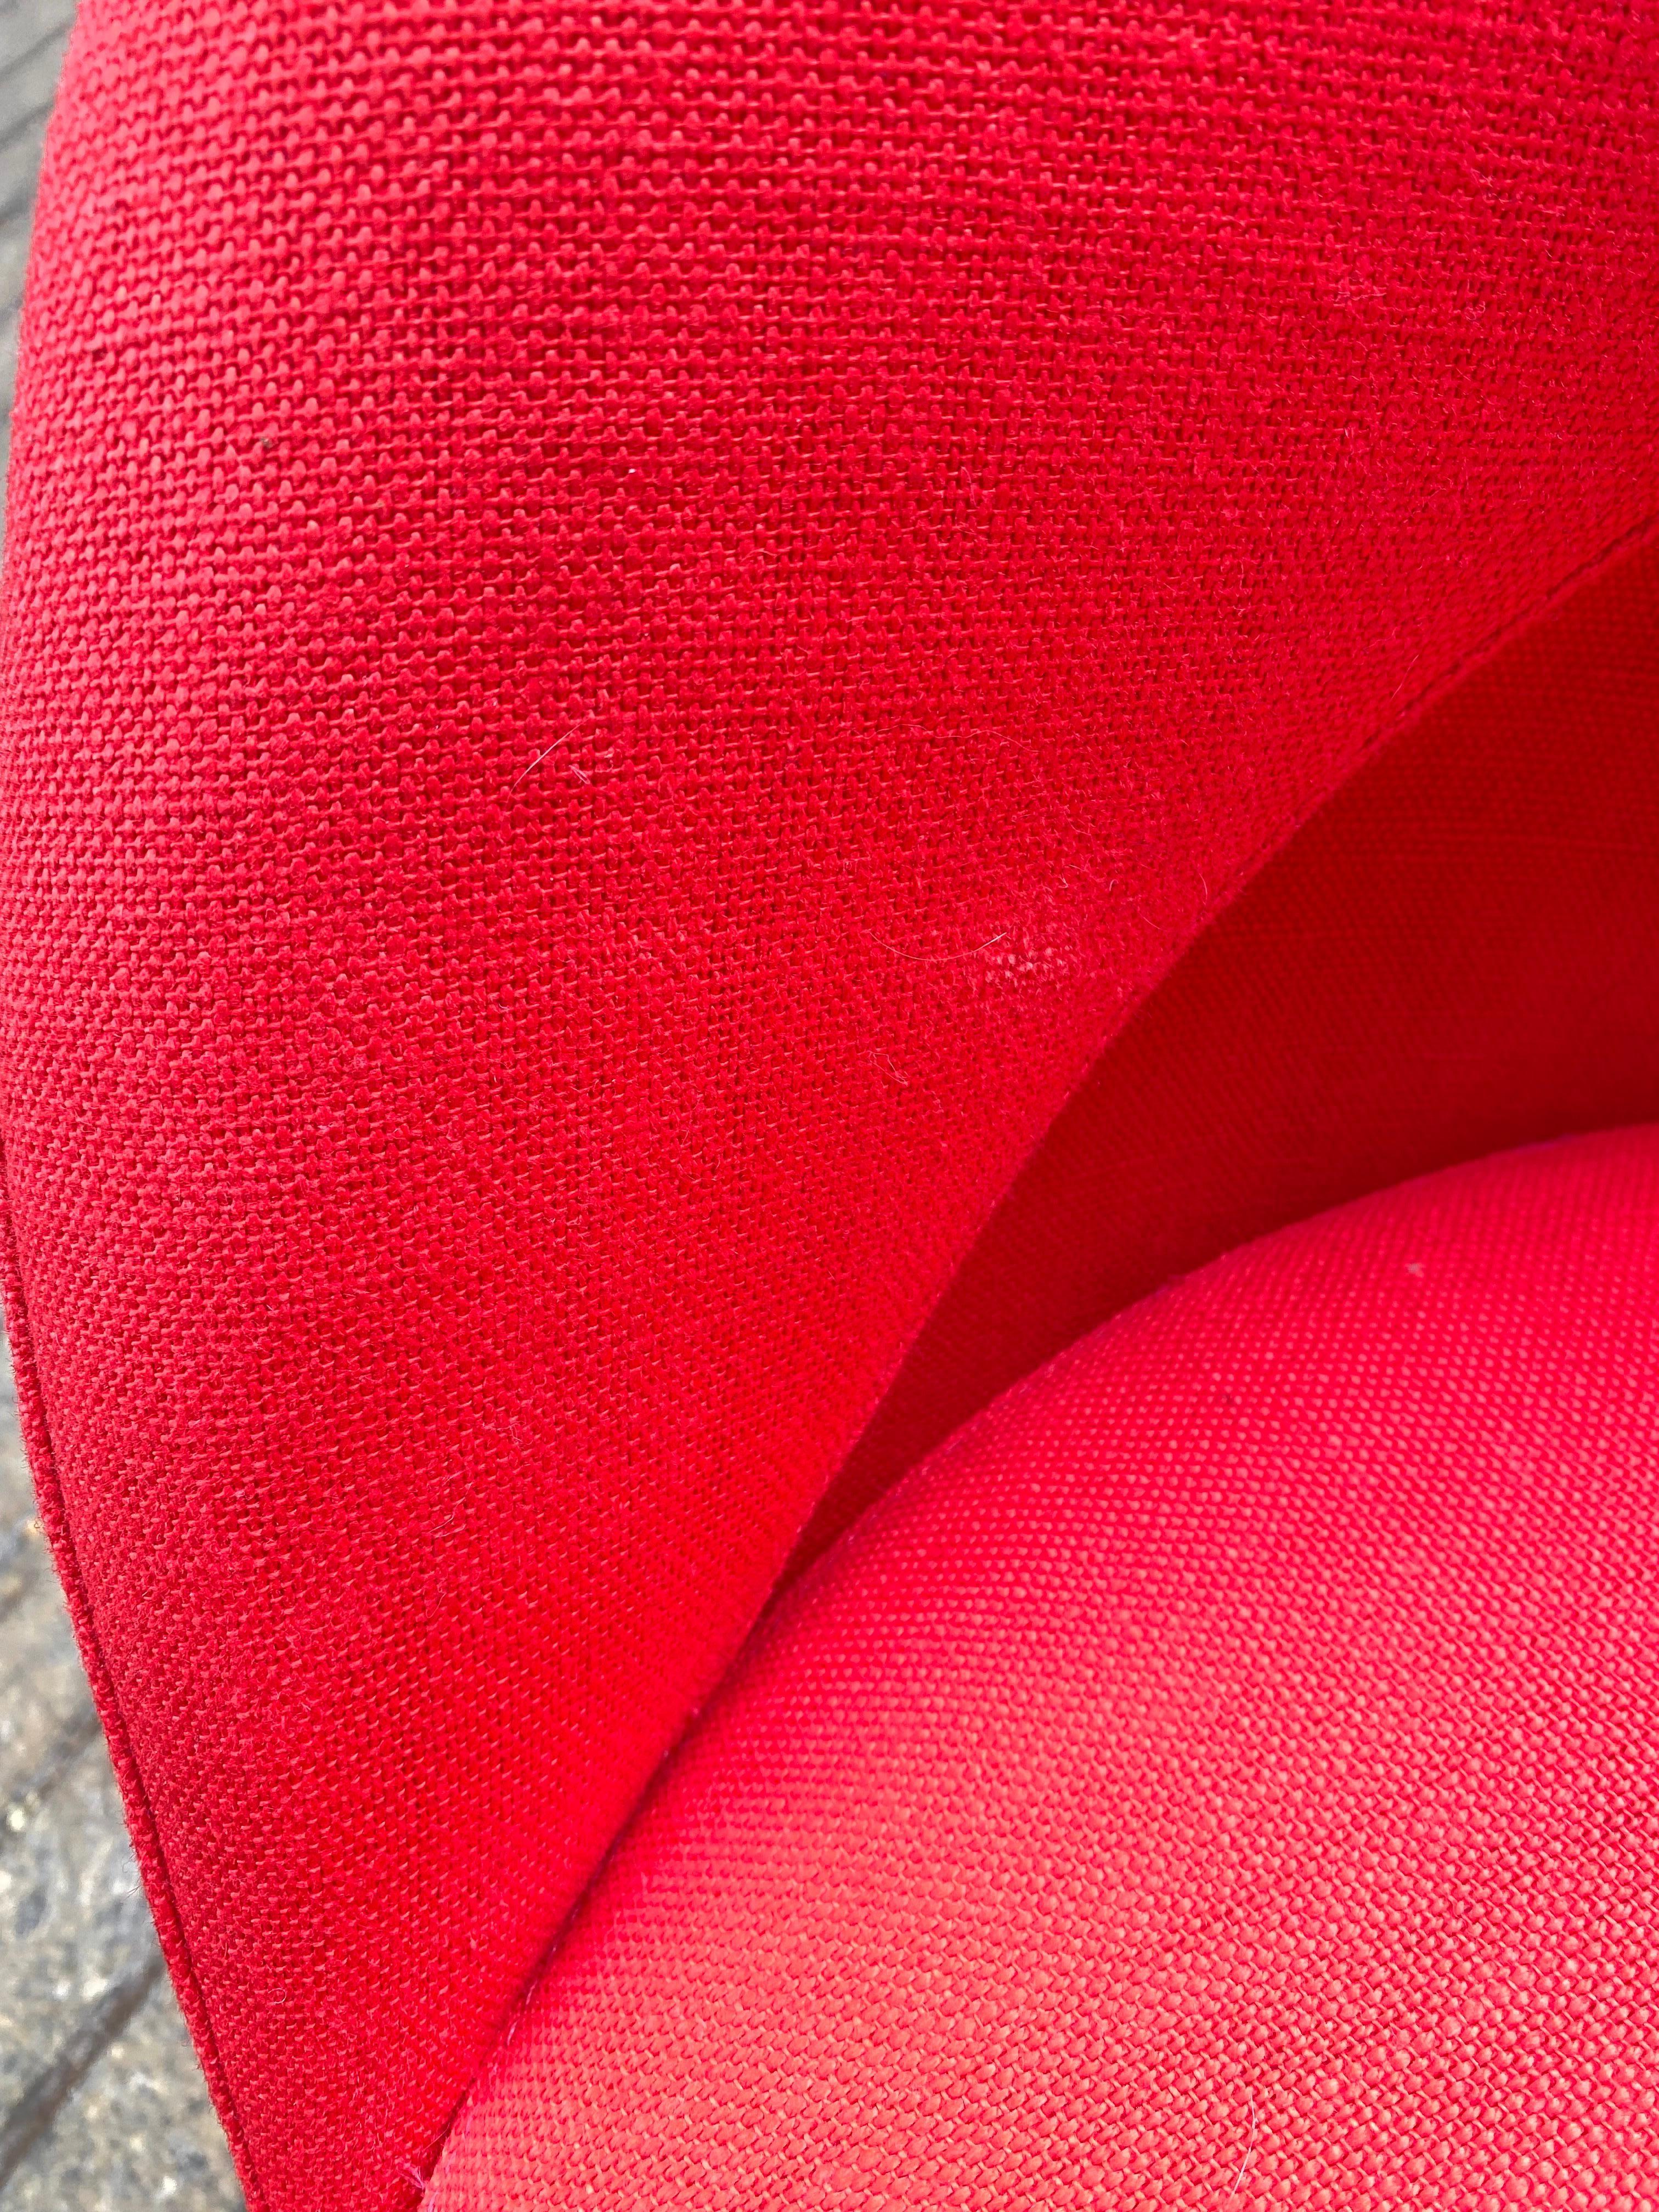 Upholstery Verner Panton Newly Reupholstered Cone Chair For Sale